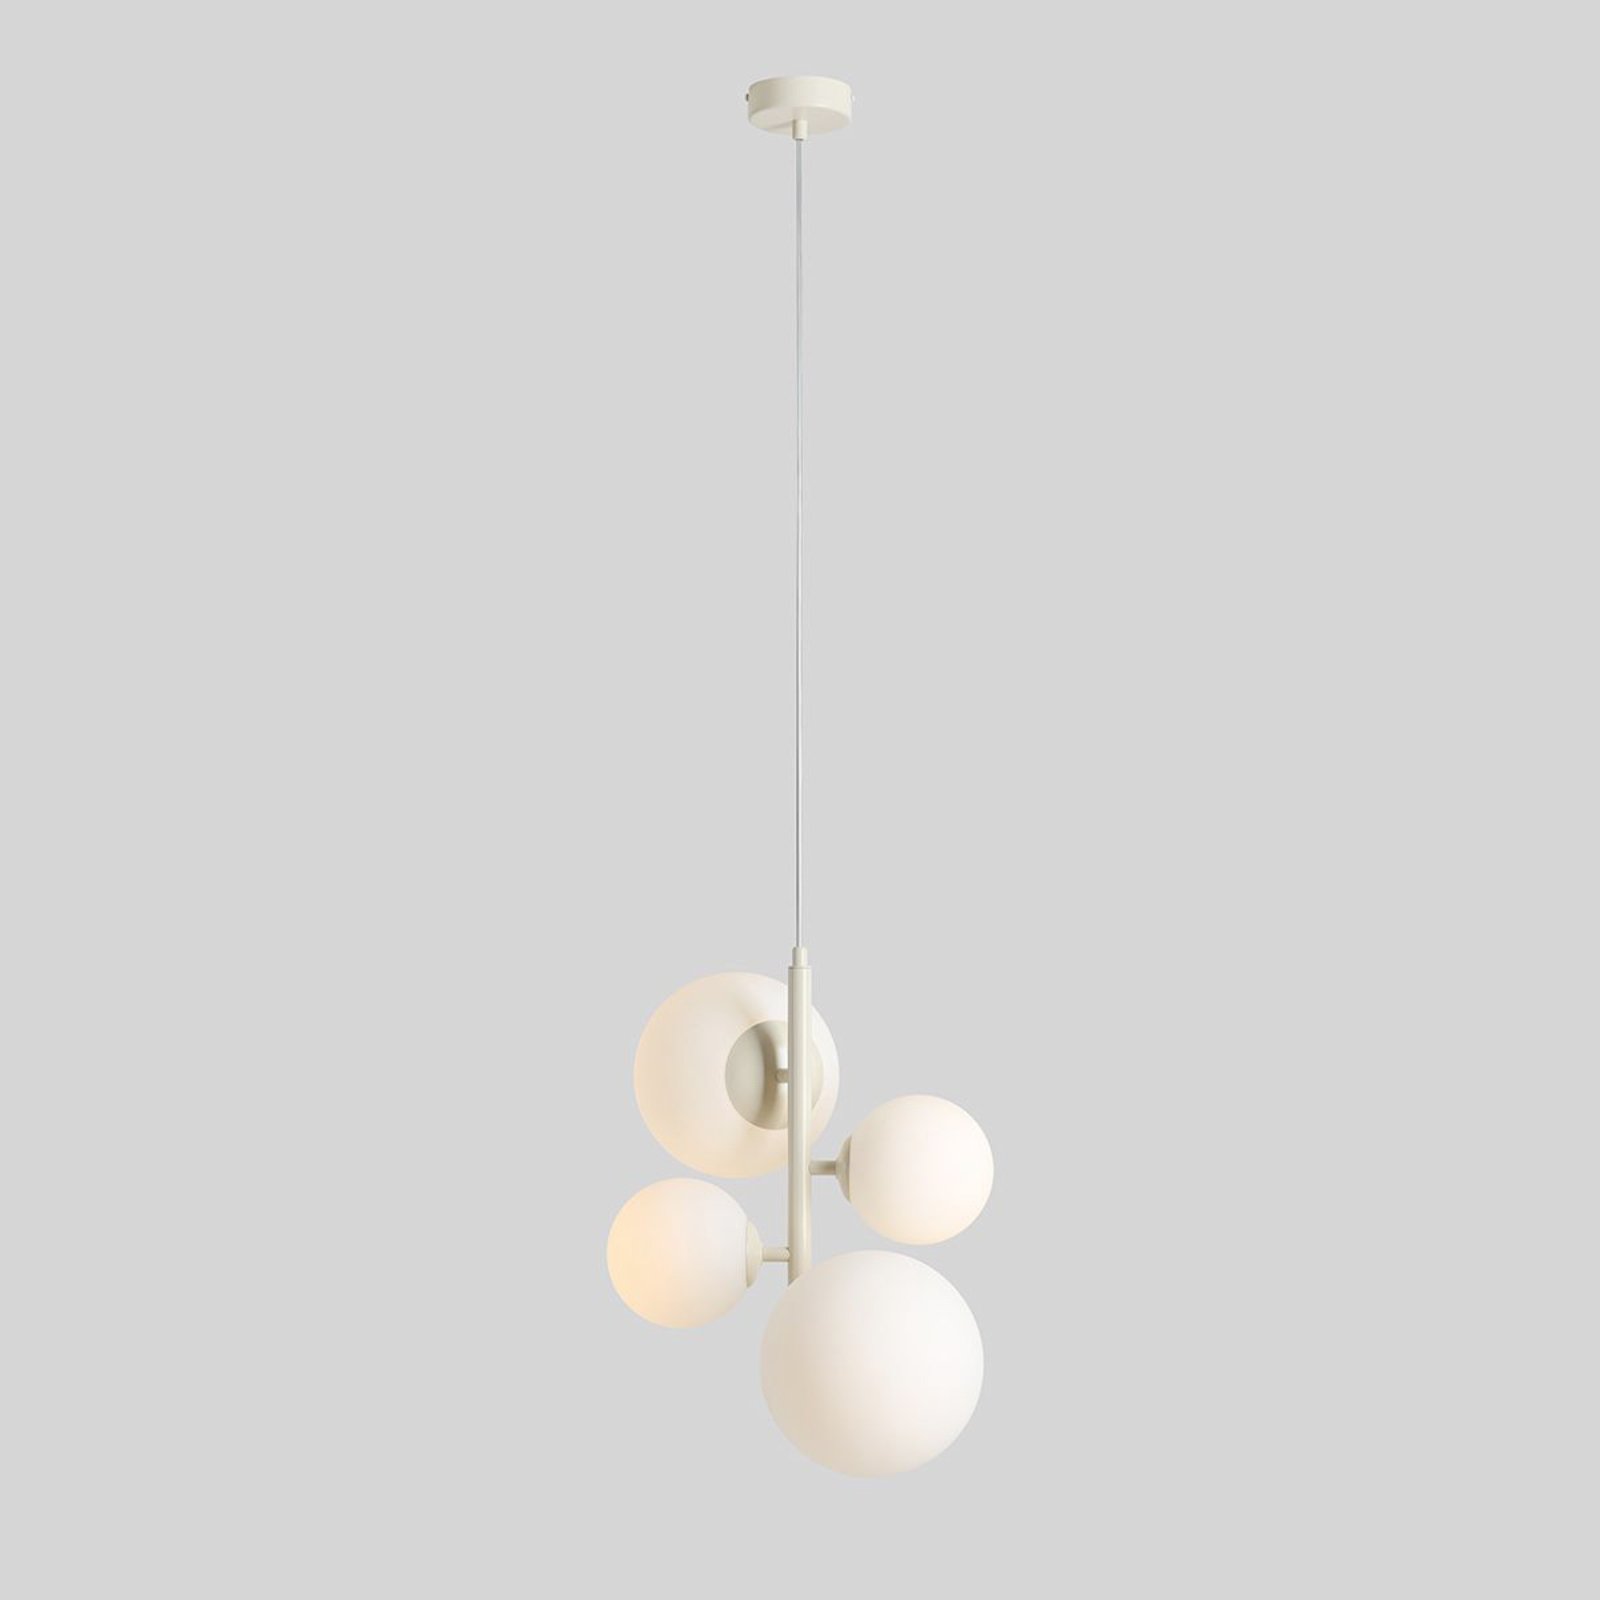 Hanglamp Dione, opaal/crème, 4-lamps